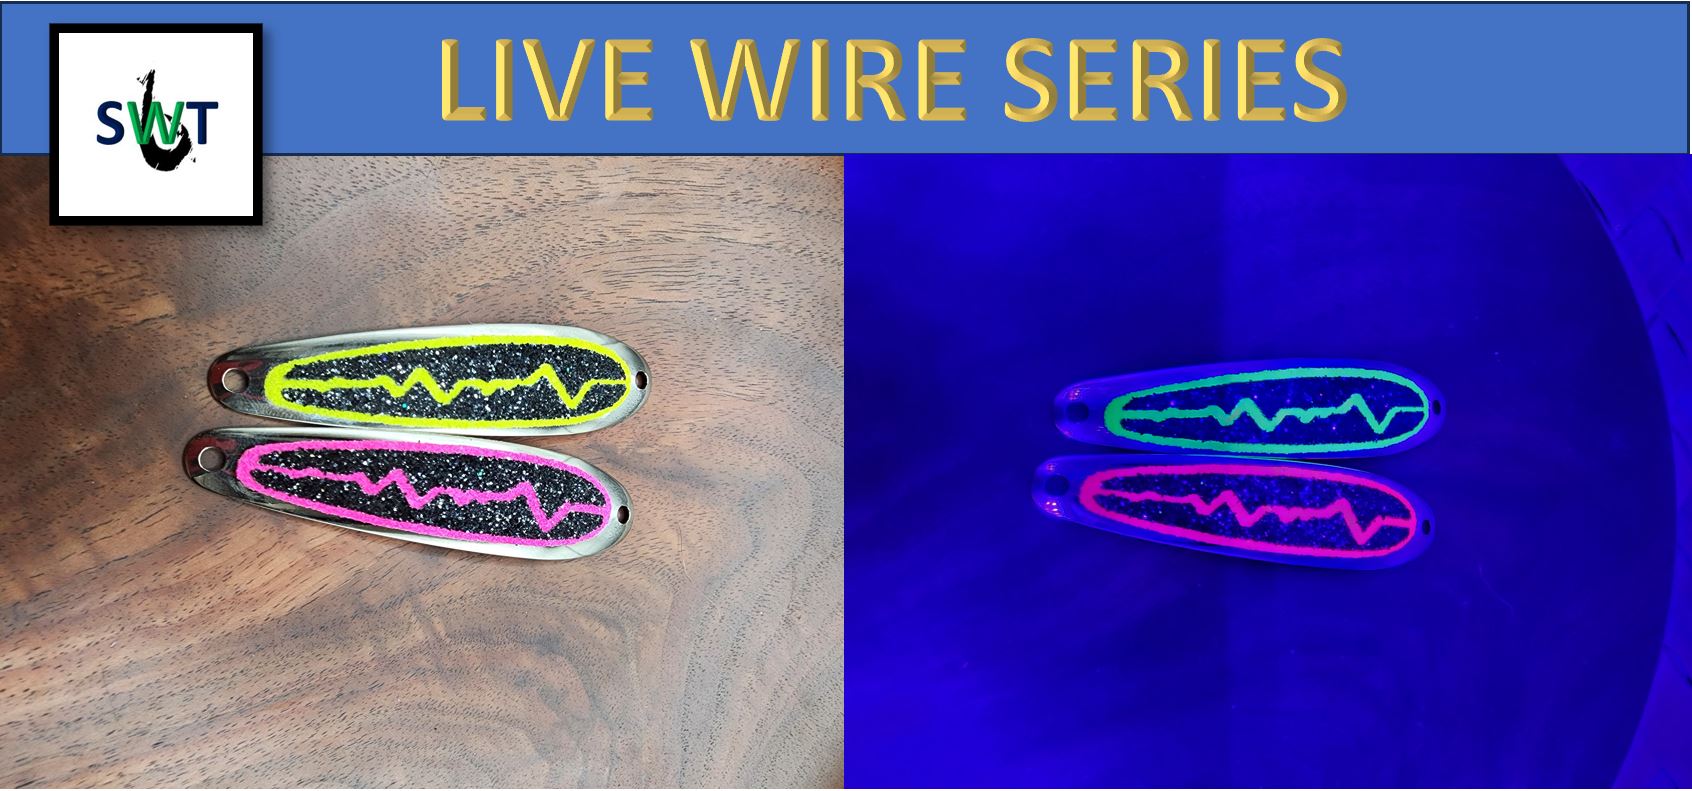 LIVE-WIRE SERIES